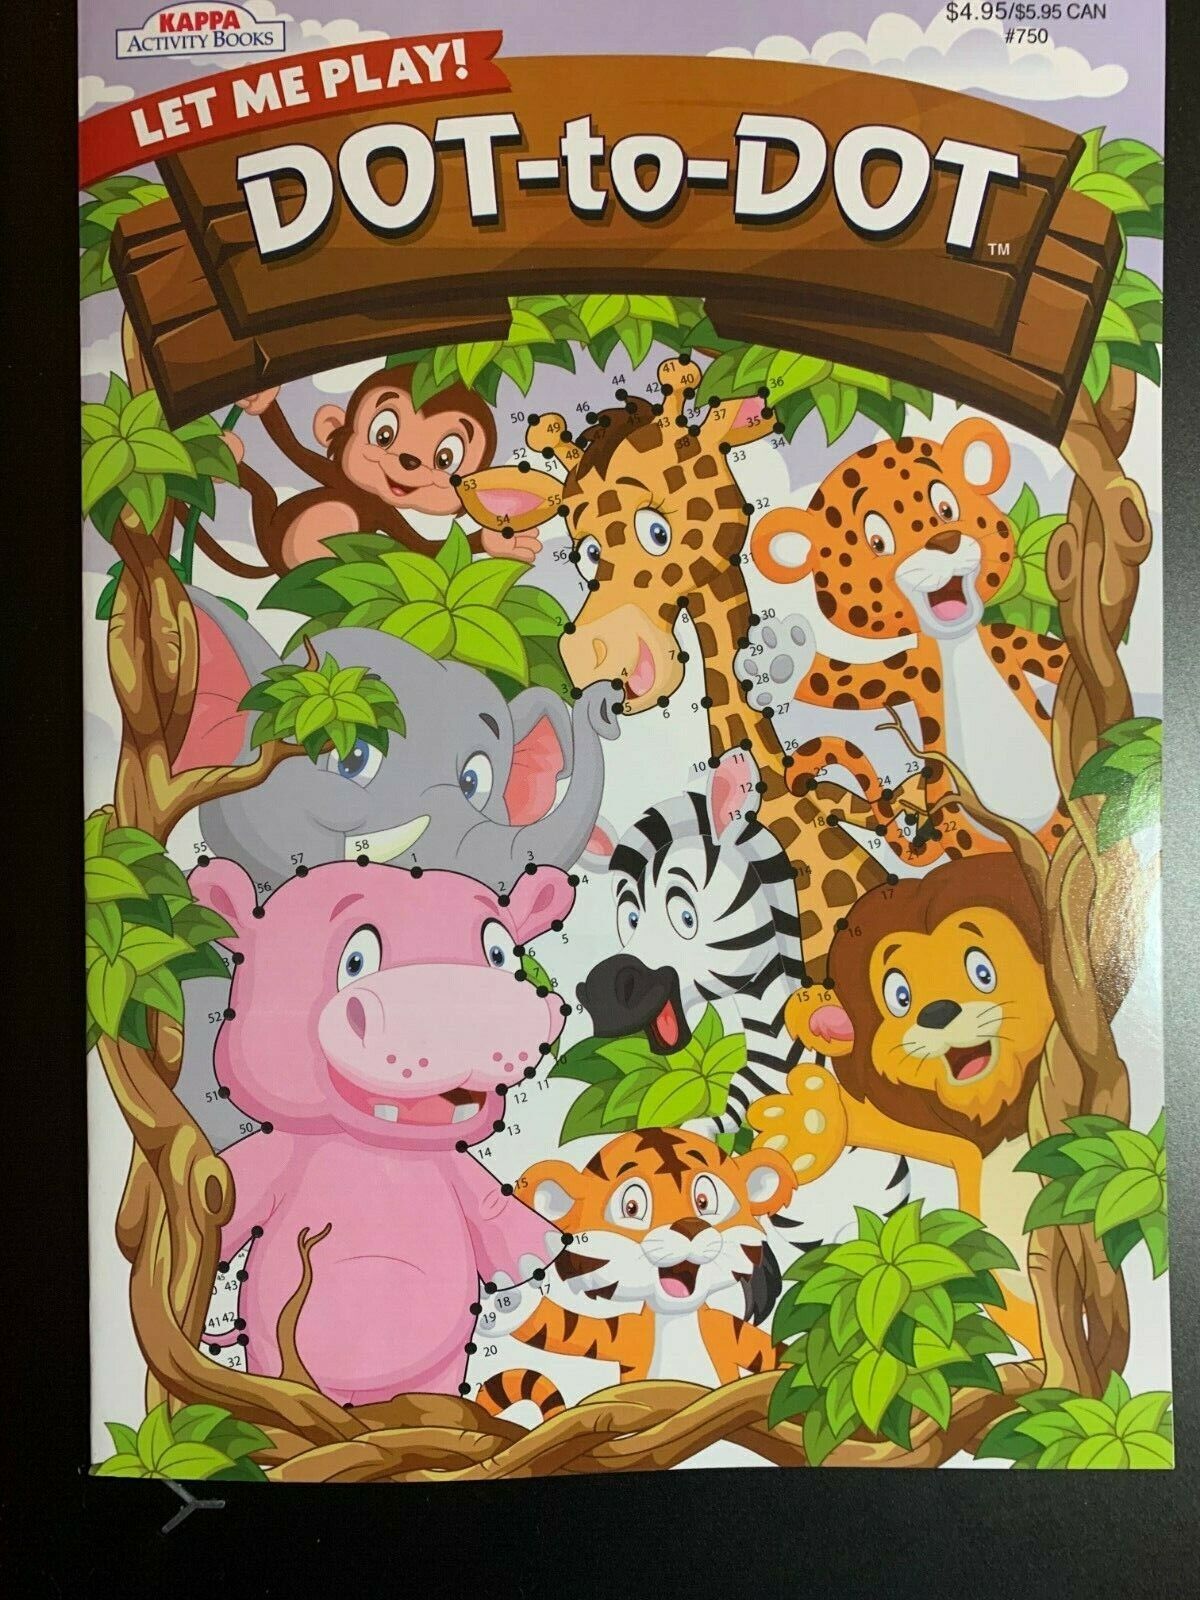 KAPPA DOT TO DOT ACTIVITY BOOK FOR KIDS LET ME PLAY FUN GAMES! ZOO ANIMAL  COVER 88908750005 | eBay